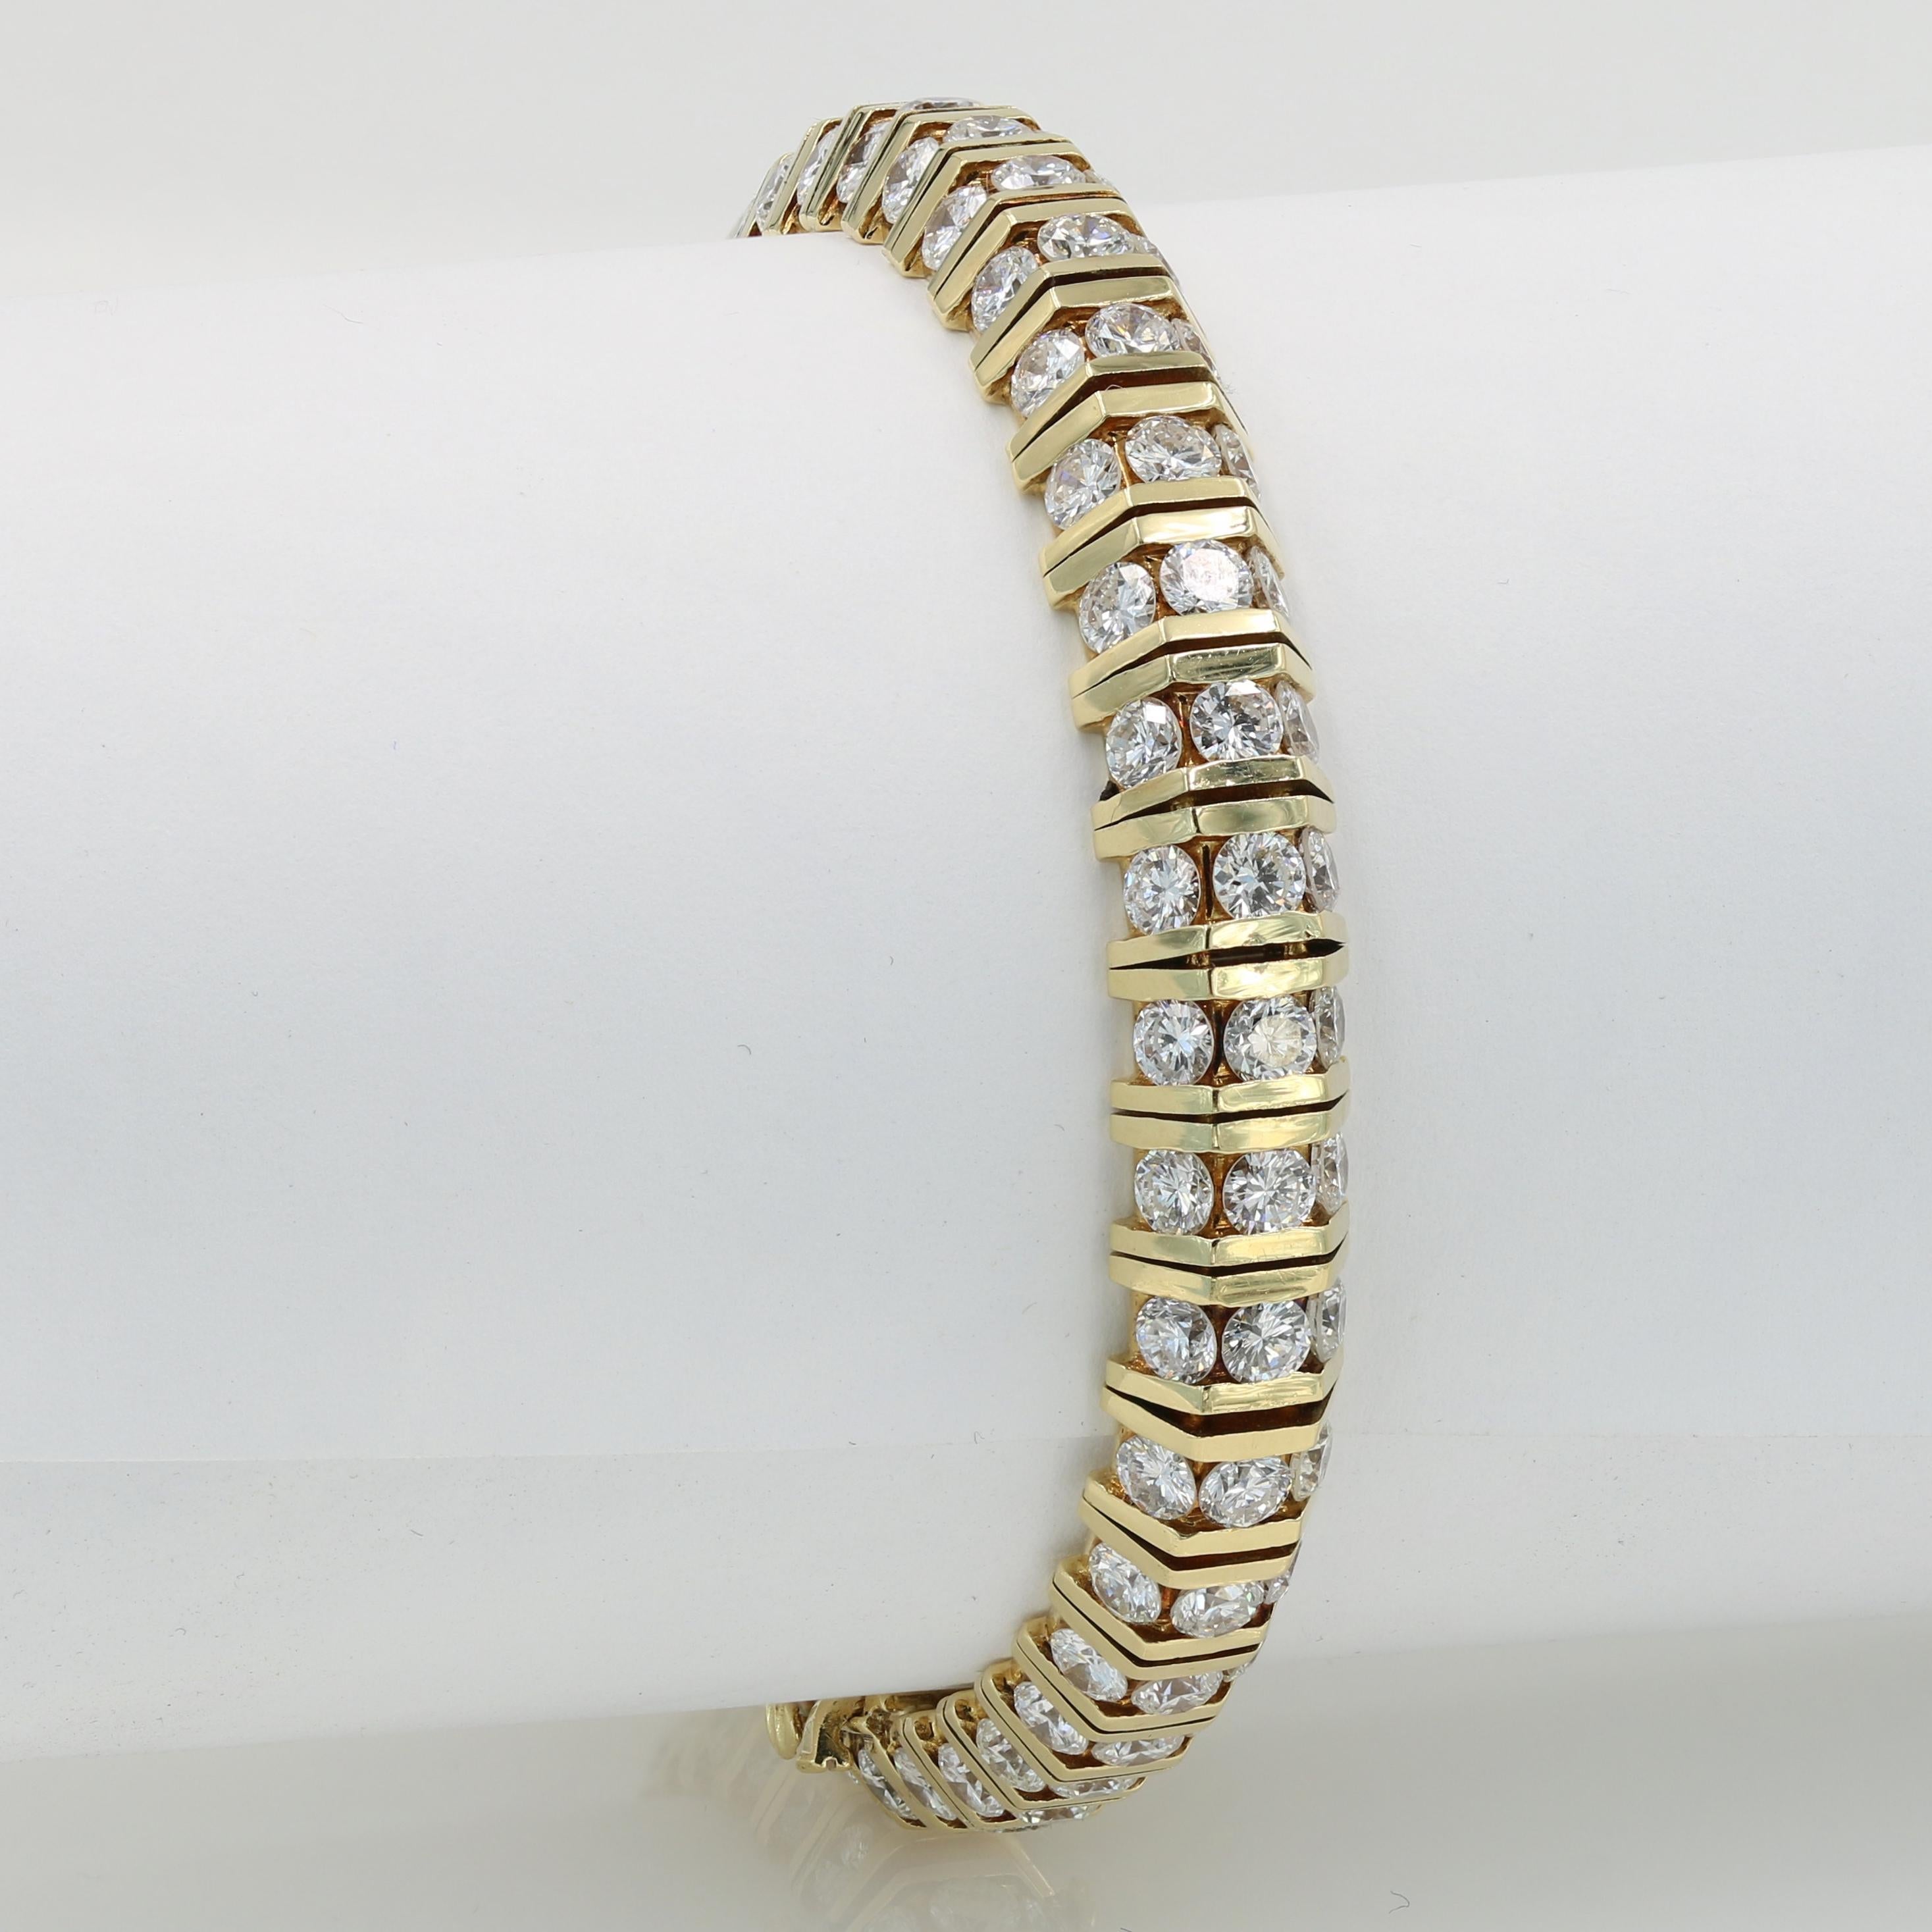 Dennis Lampert Designed 18kt Yellow Gold & Diamond Bracelet - This is an original Dennis L creation from the mid 90's. Pre-owned but restored to like new condition. Bracelet has 114 round cut diamonds that weigh 11.25cts total (G-H VS-SI) that are